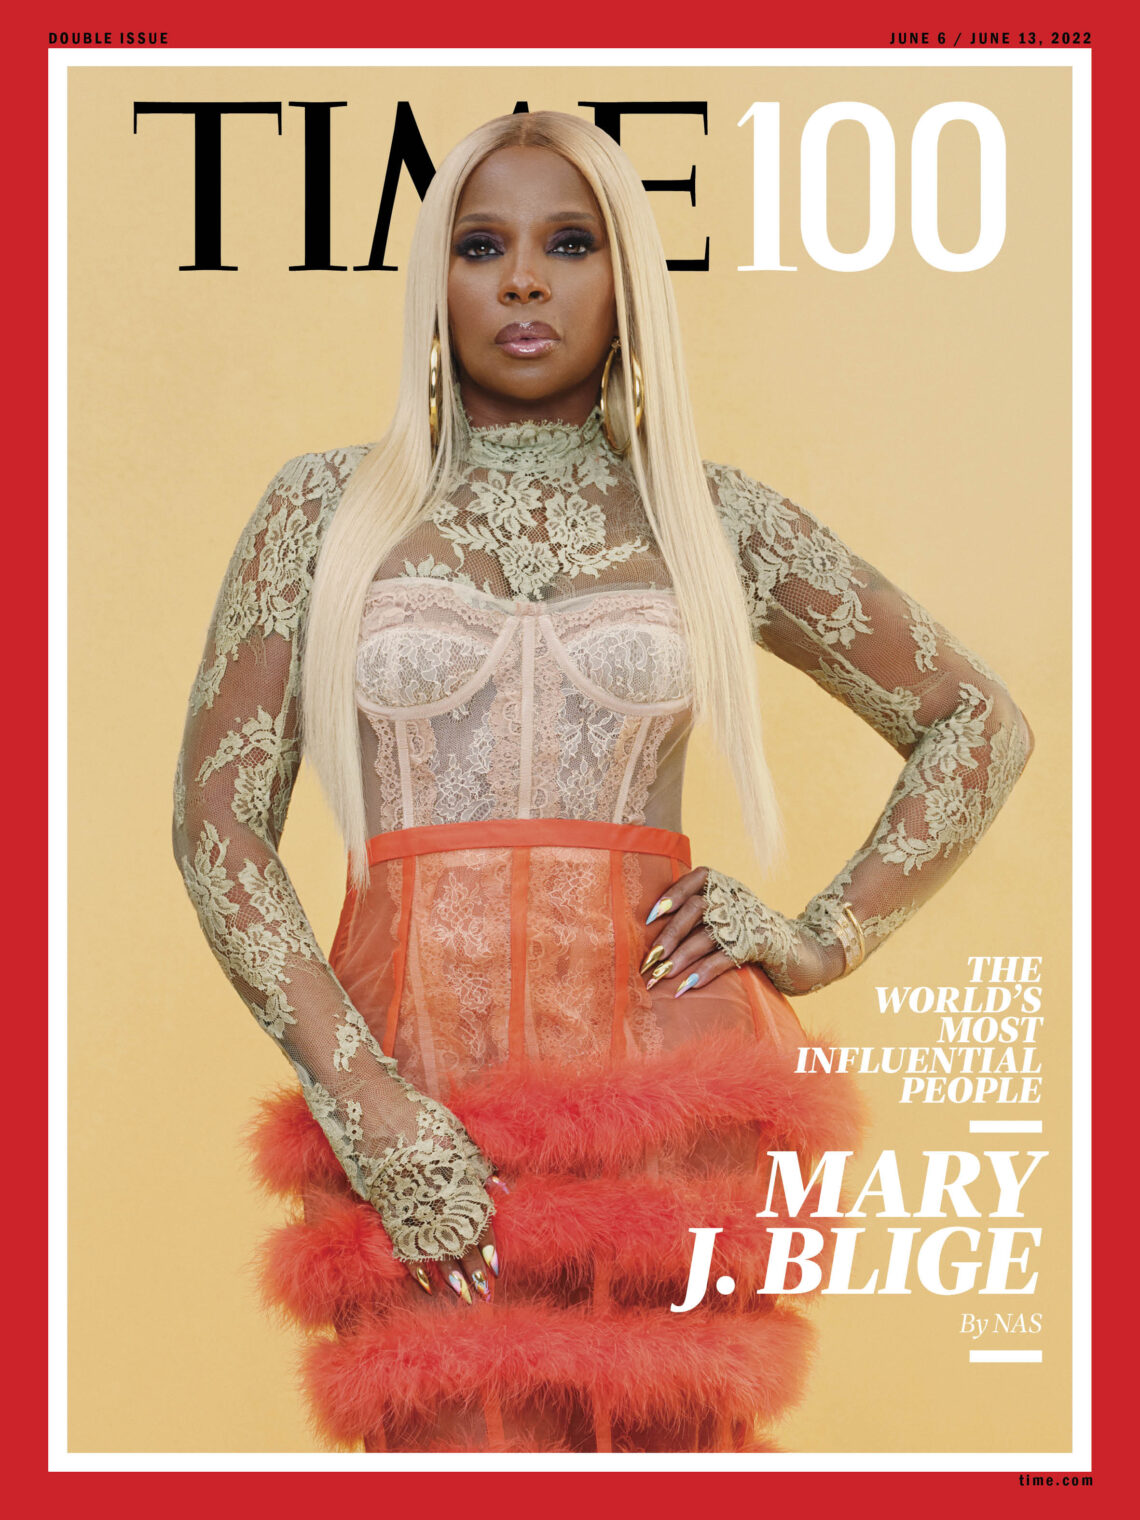 Mary J Blige's 20 greatest songs – ranked!, Mary J Blige